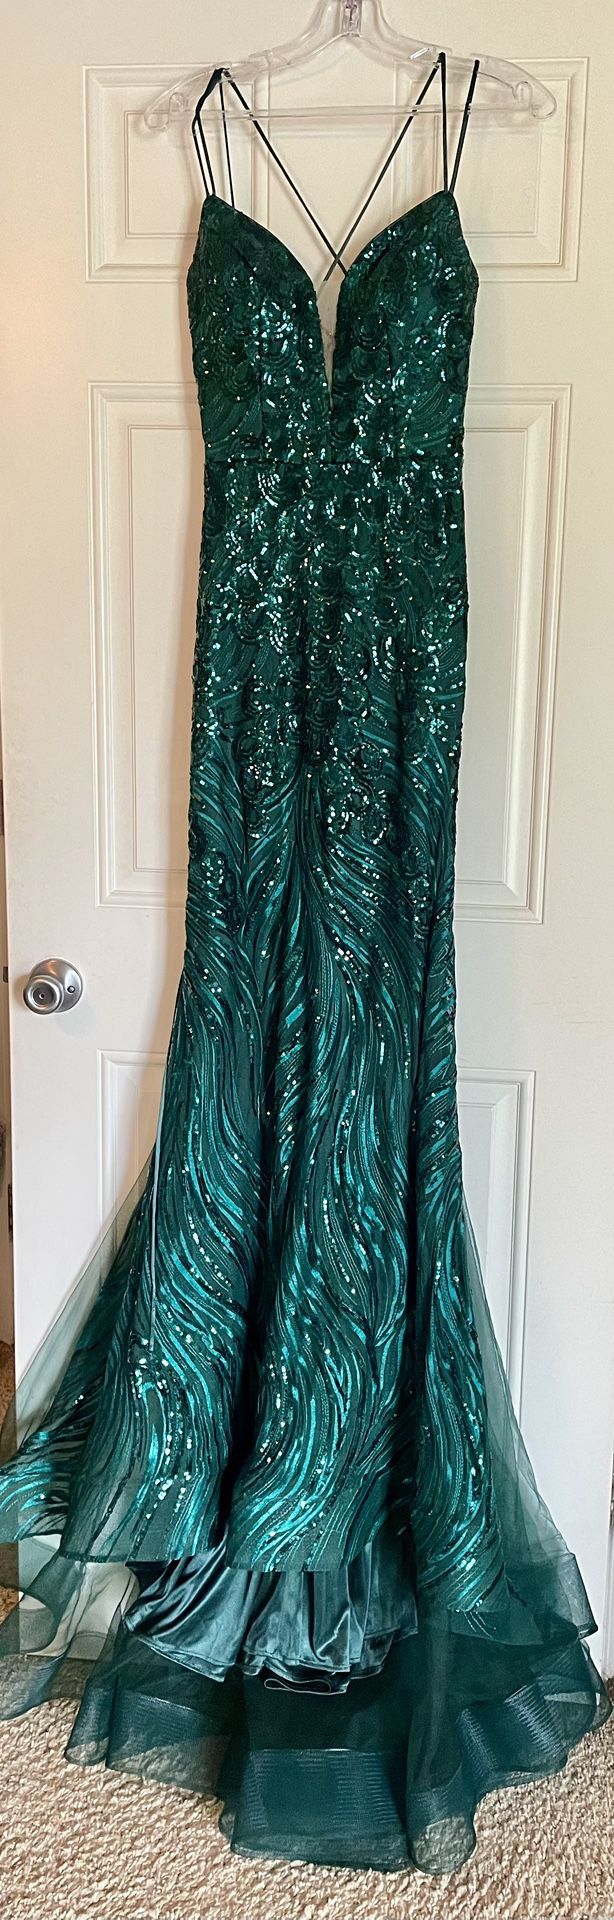 Prom Dress - Amelia Couture Size 4